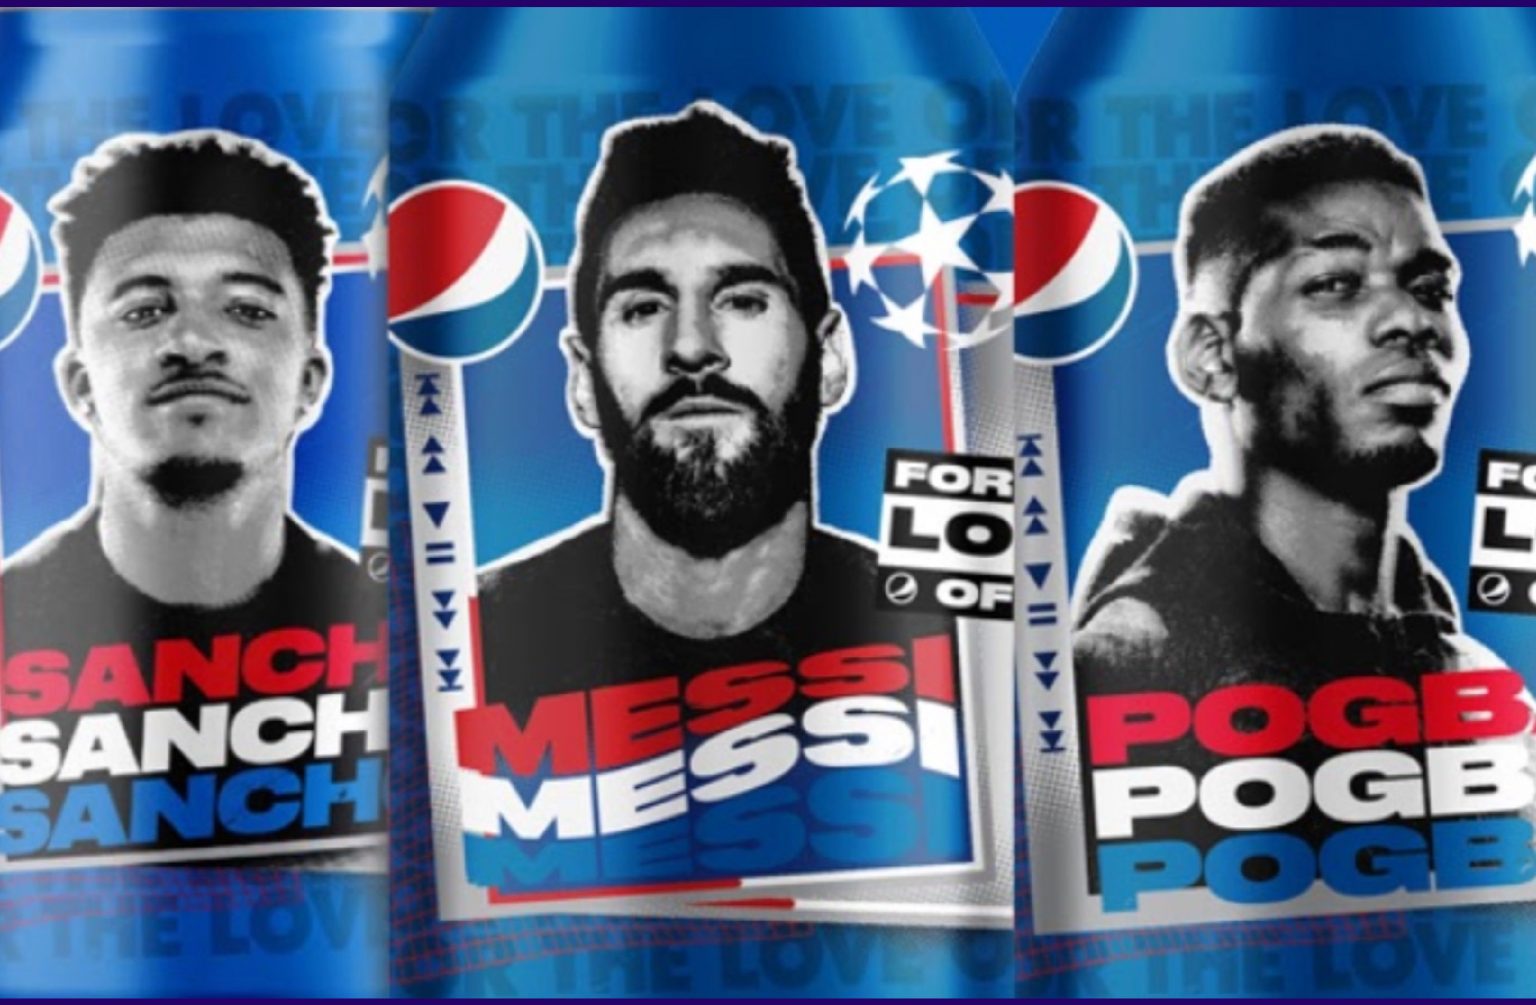 Football and pop culture blend in new Pepsi ad feat. Messi, Pogba and